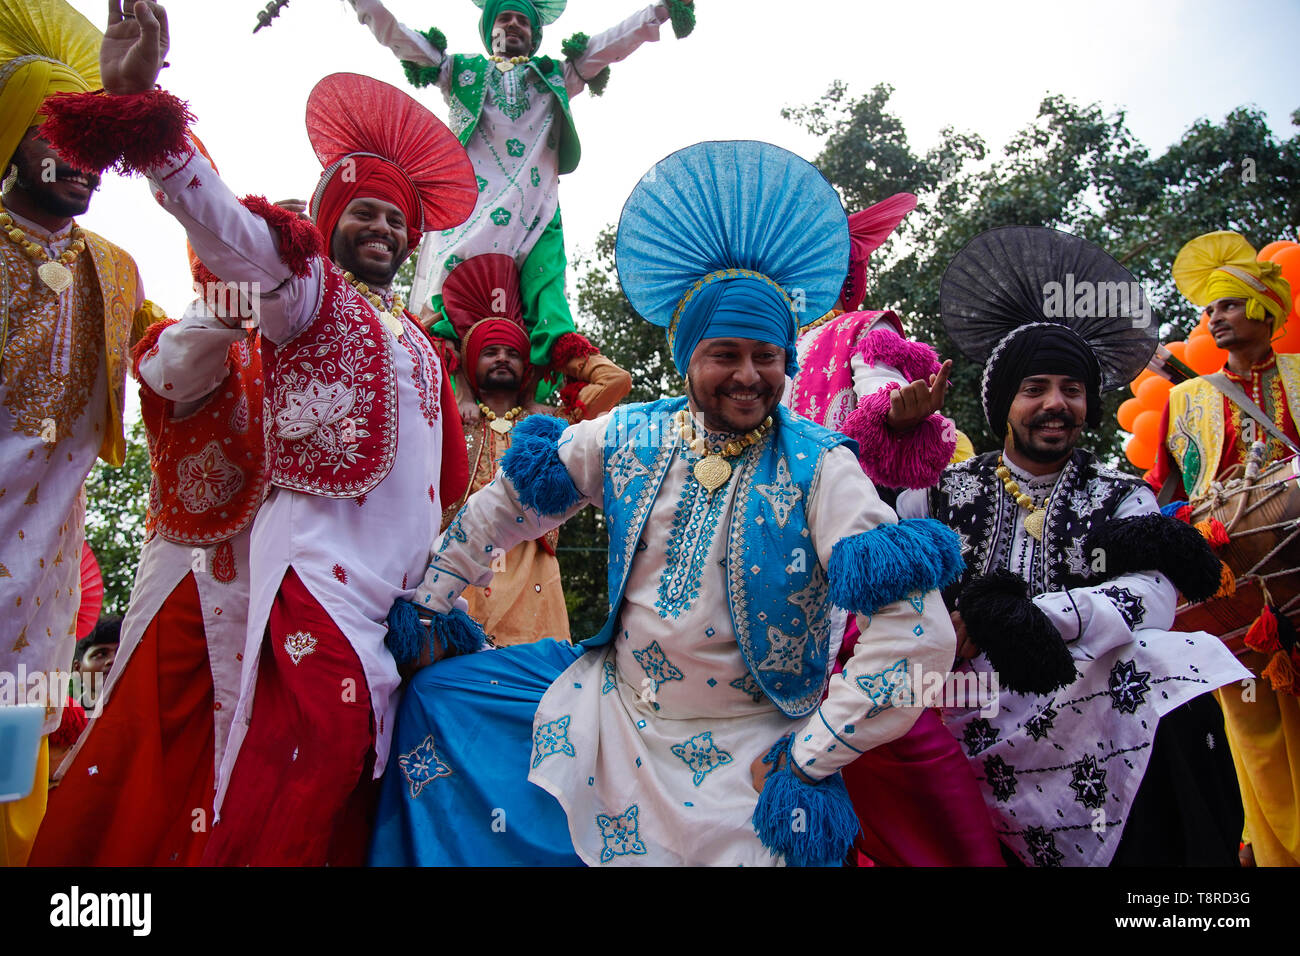 Performers seen dressed in traditional costumes while dancing during the Show in Kolkata. Bharatiya Janata Party (BJP) president Amit Shah on Tuesday held a mega roadshow in Kolkata with support of party's candidates ahead of the final phase of Lok Sabha polls. Stock Photo